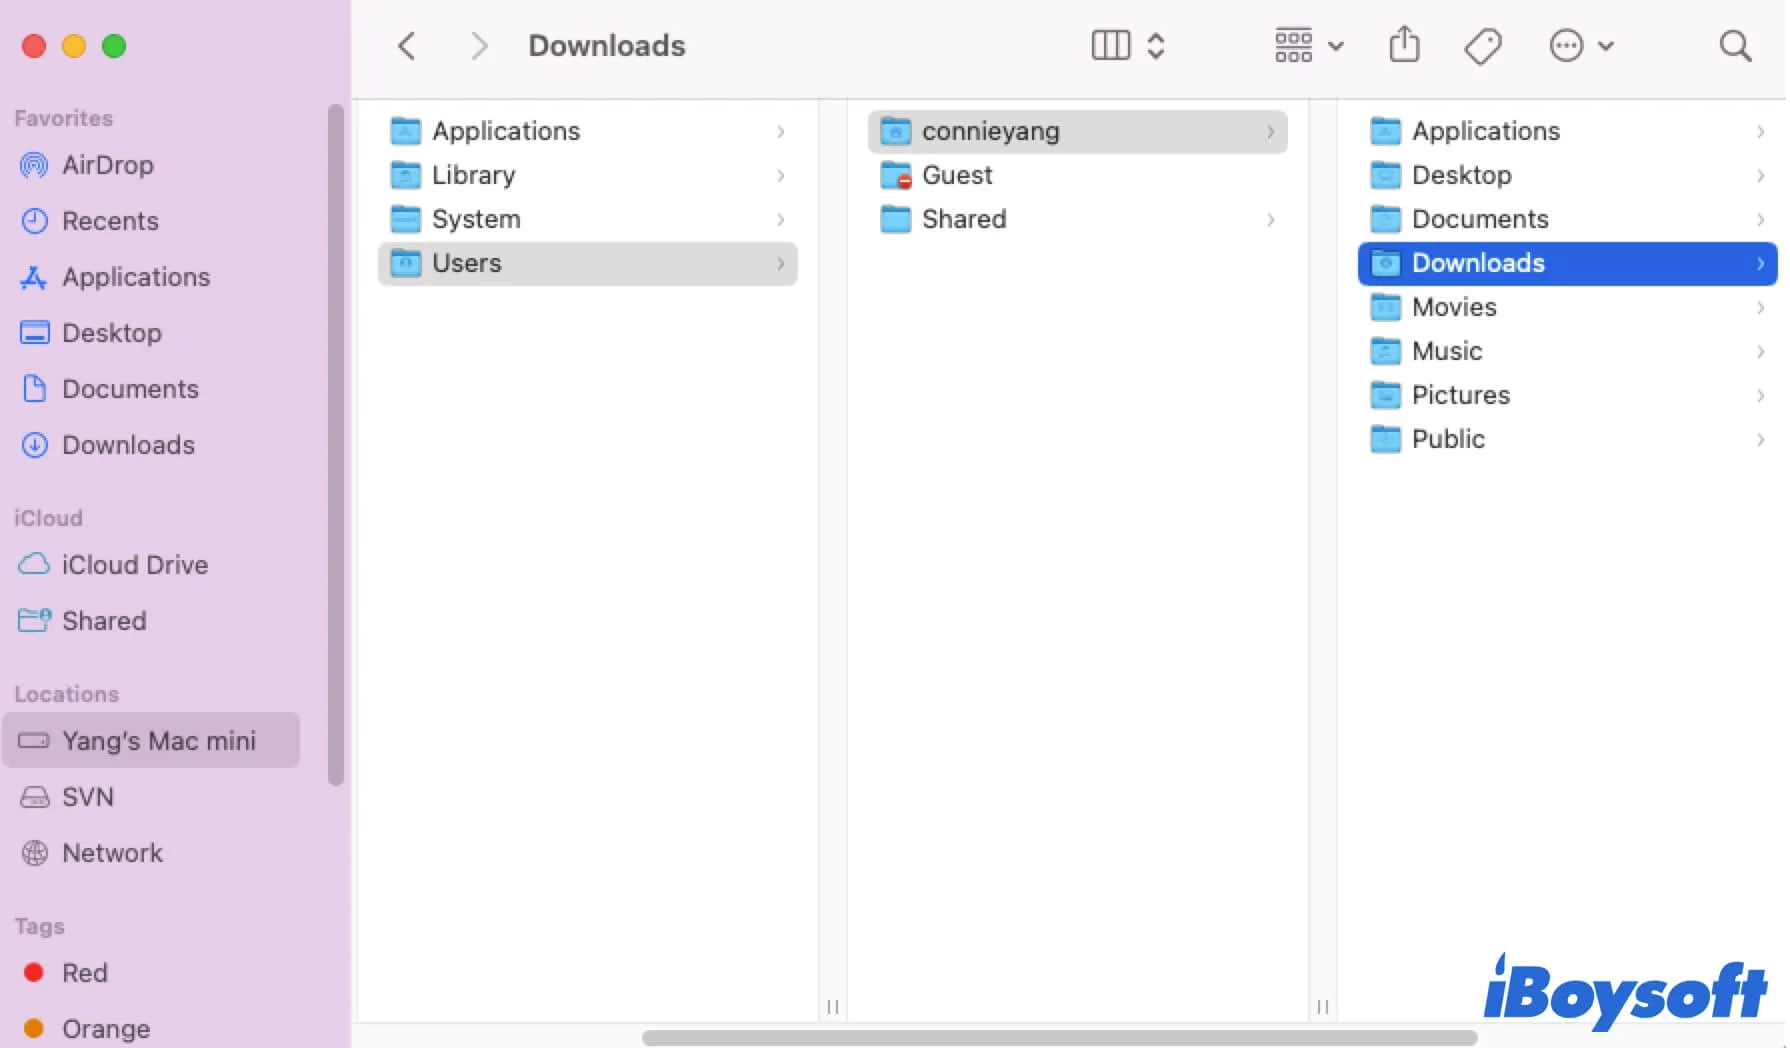 access the Downloads folder in Home directory on Mac